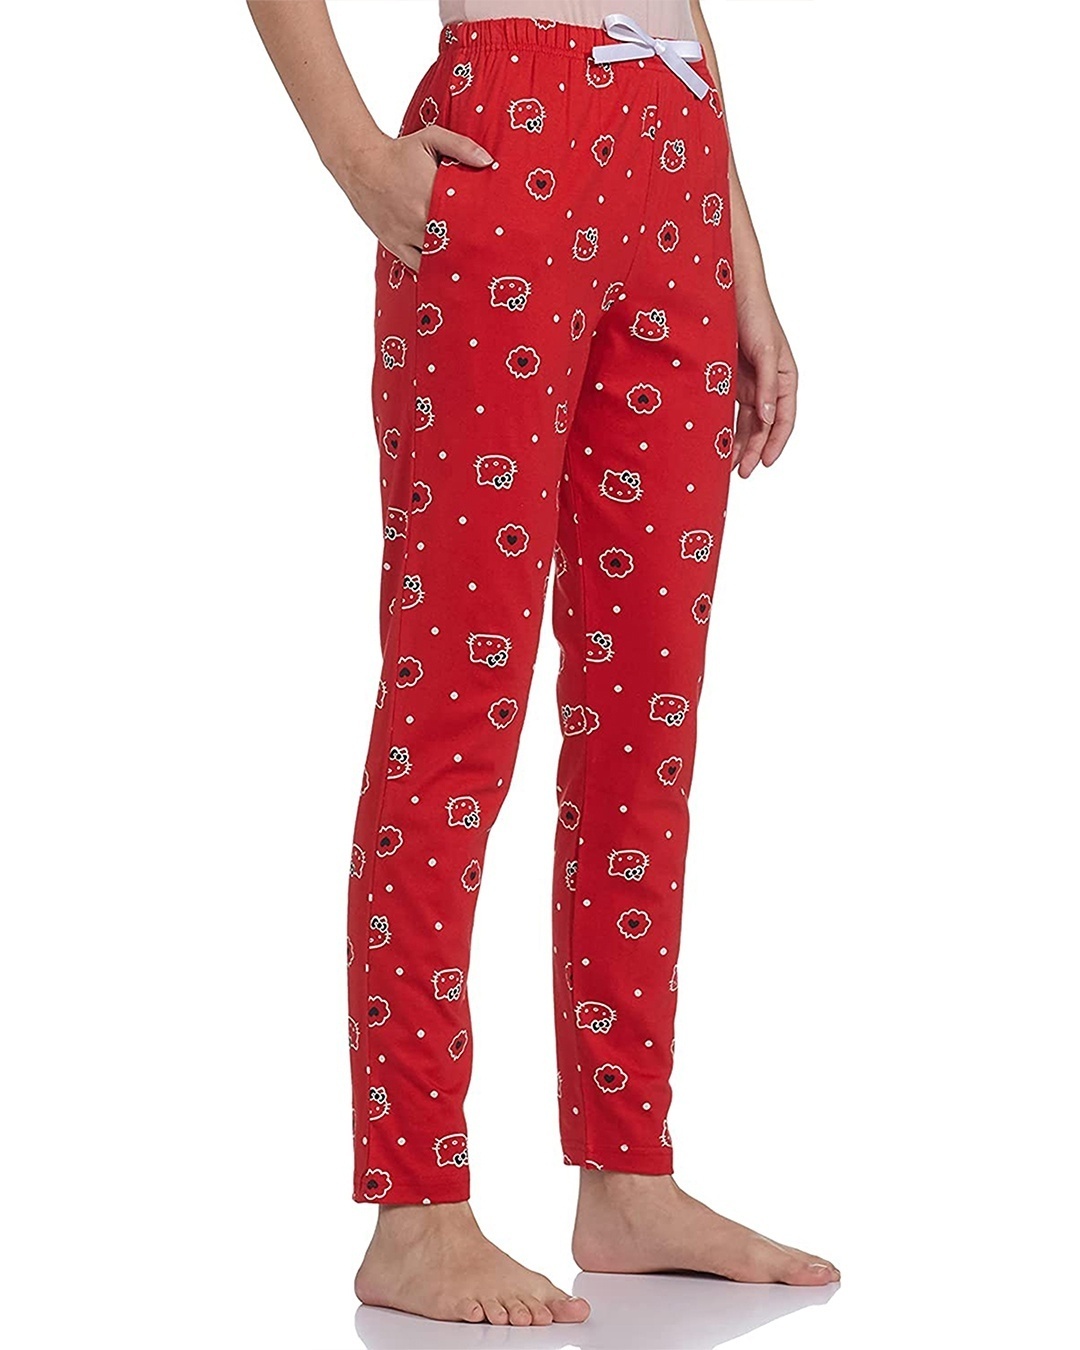 Shop Women's Red All Over Cat Printed Cotton Pyjamas-Back